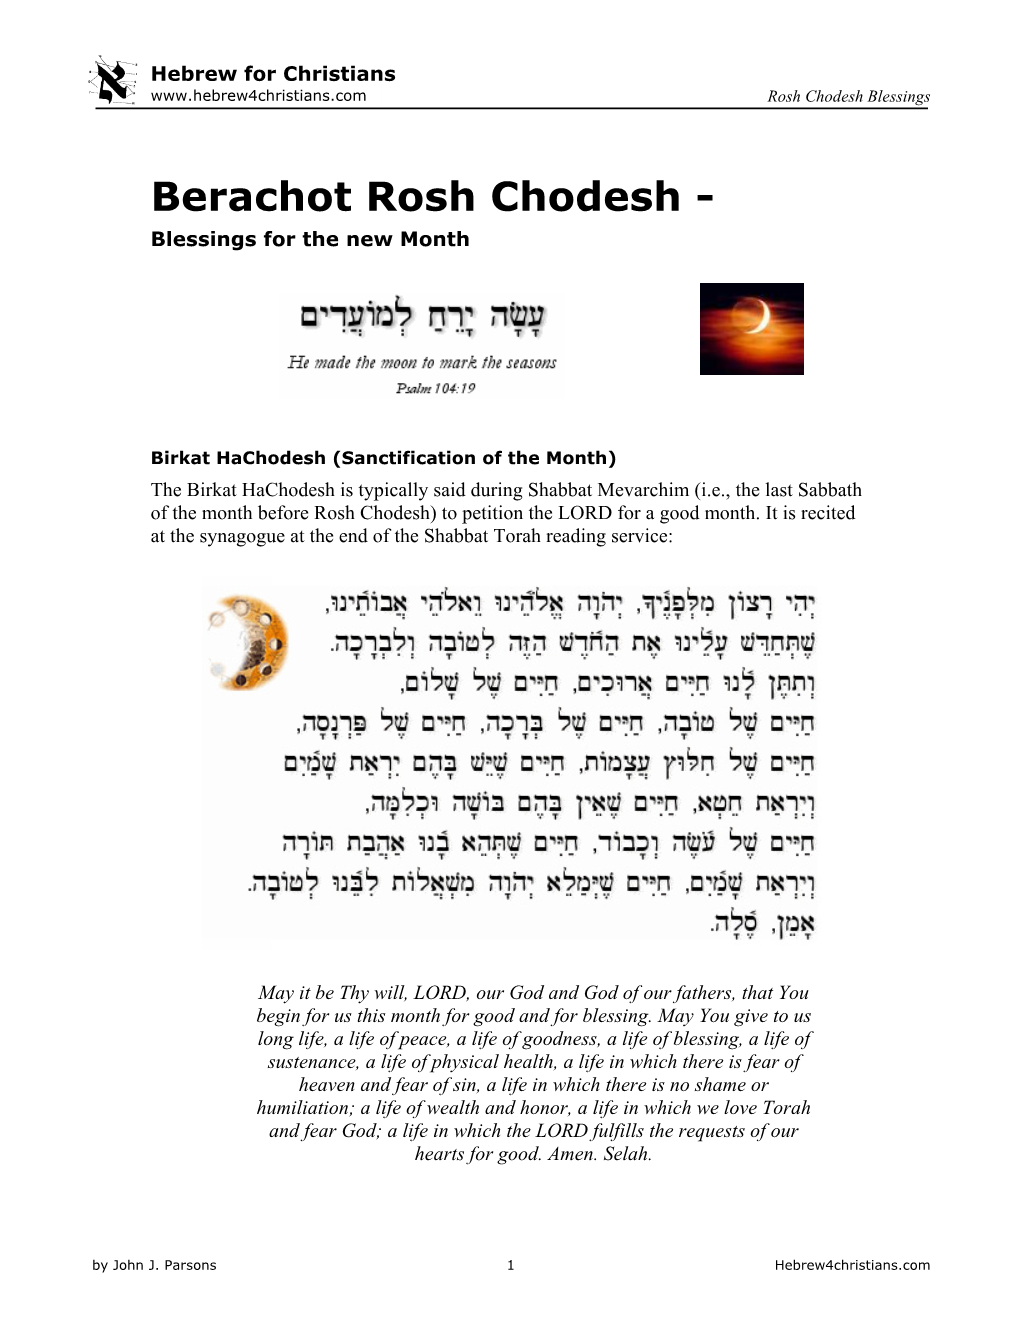 Berachot Rosh Chodesh - Blessings for the New Month